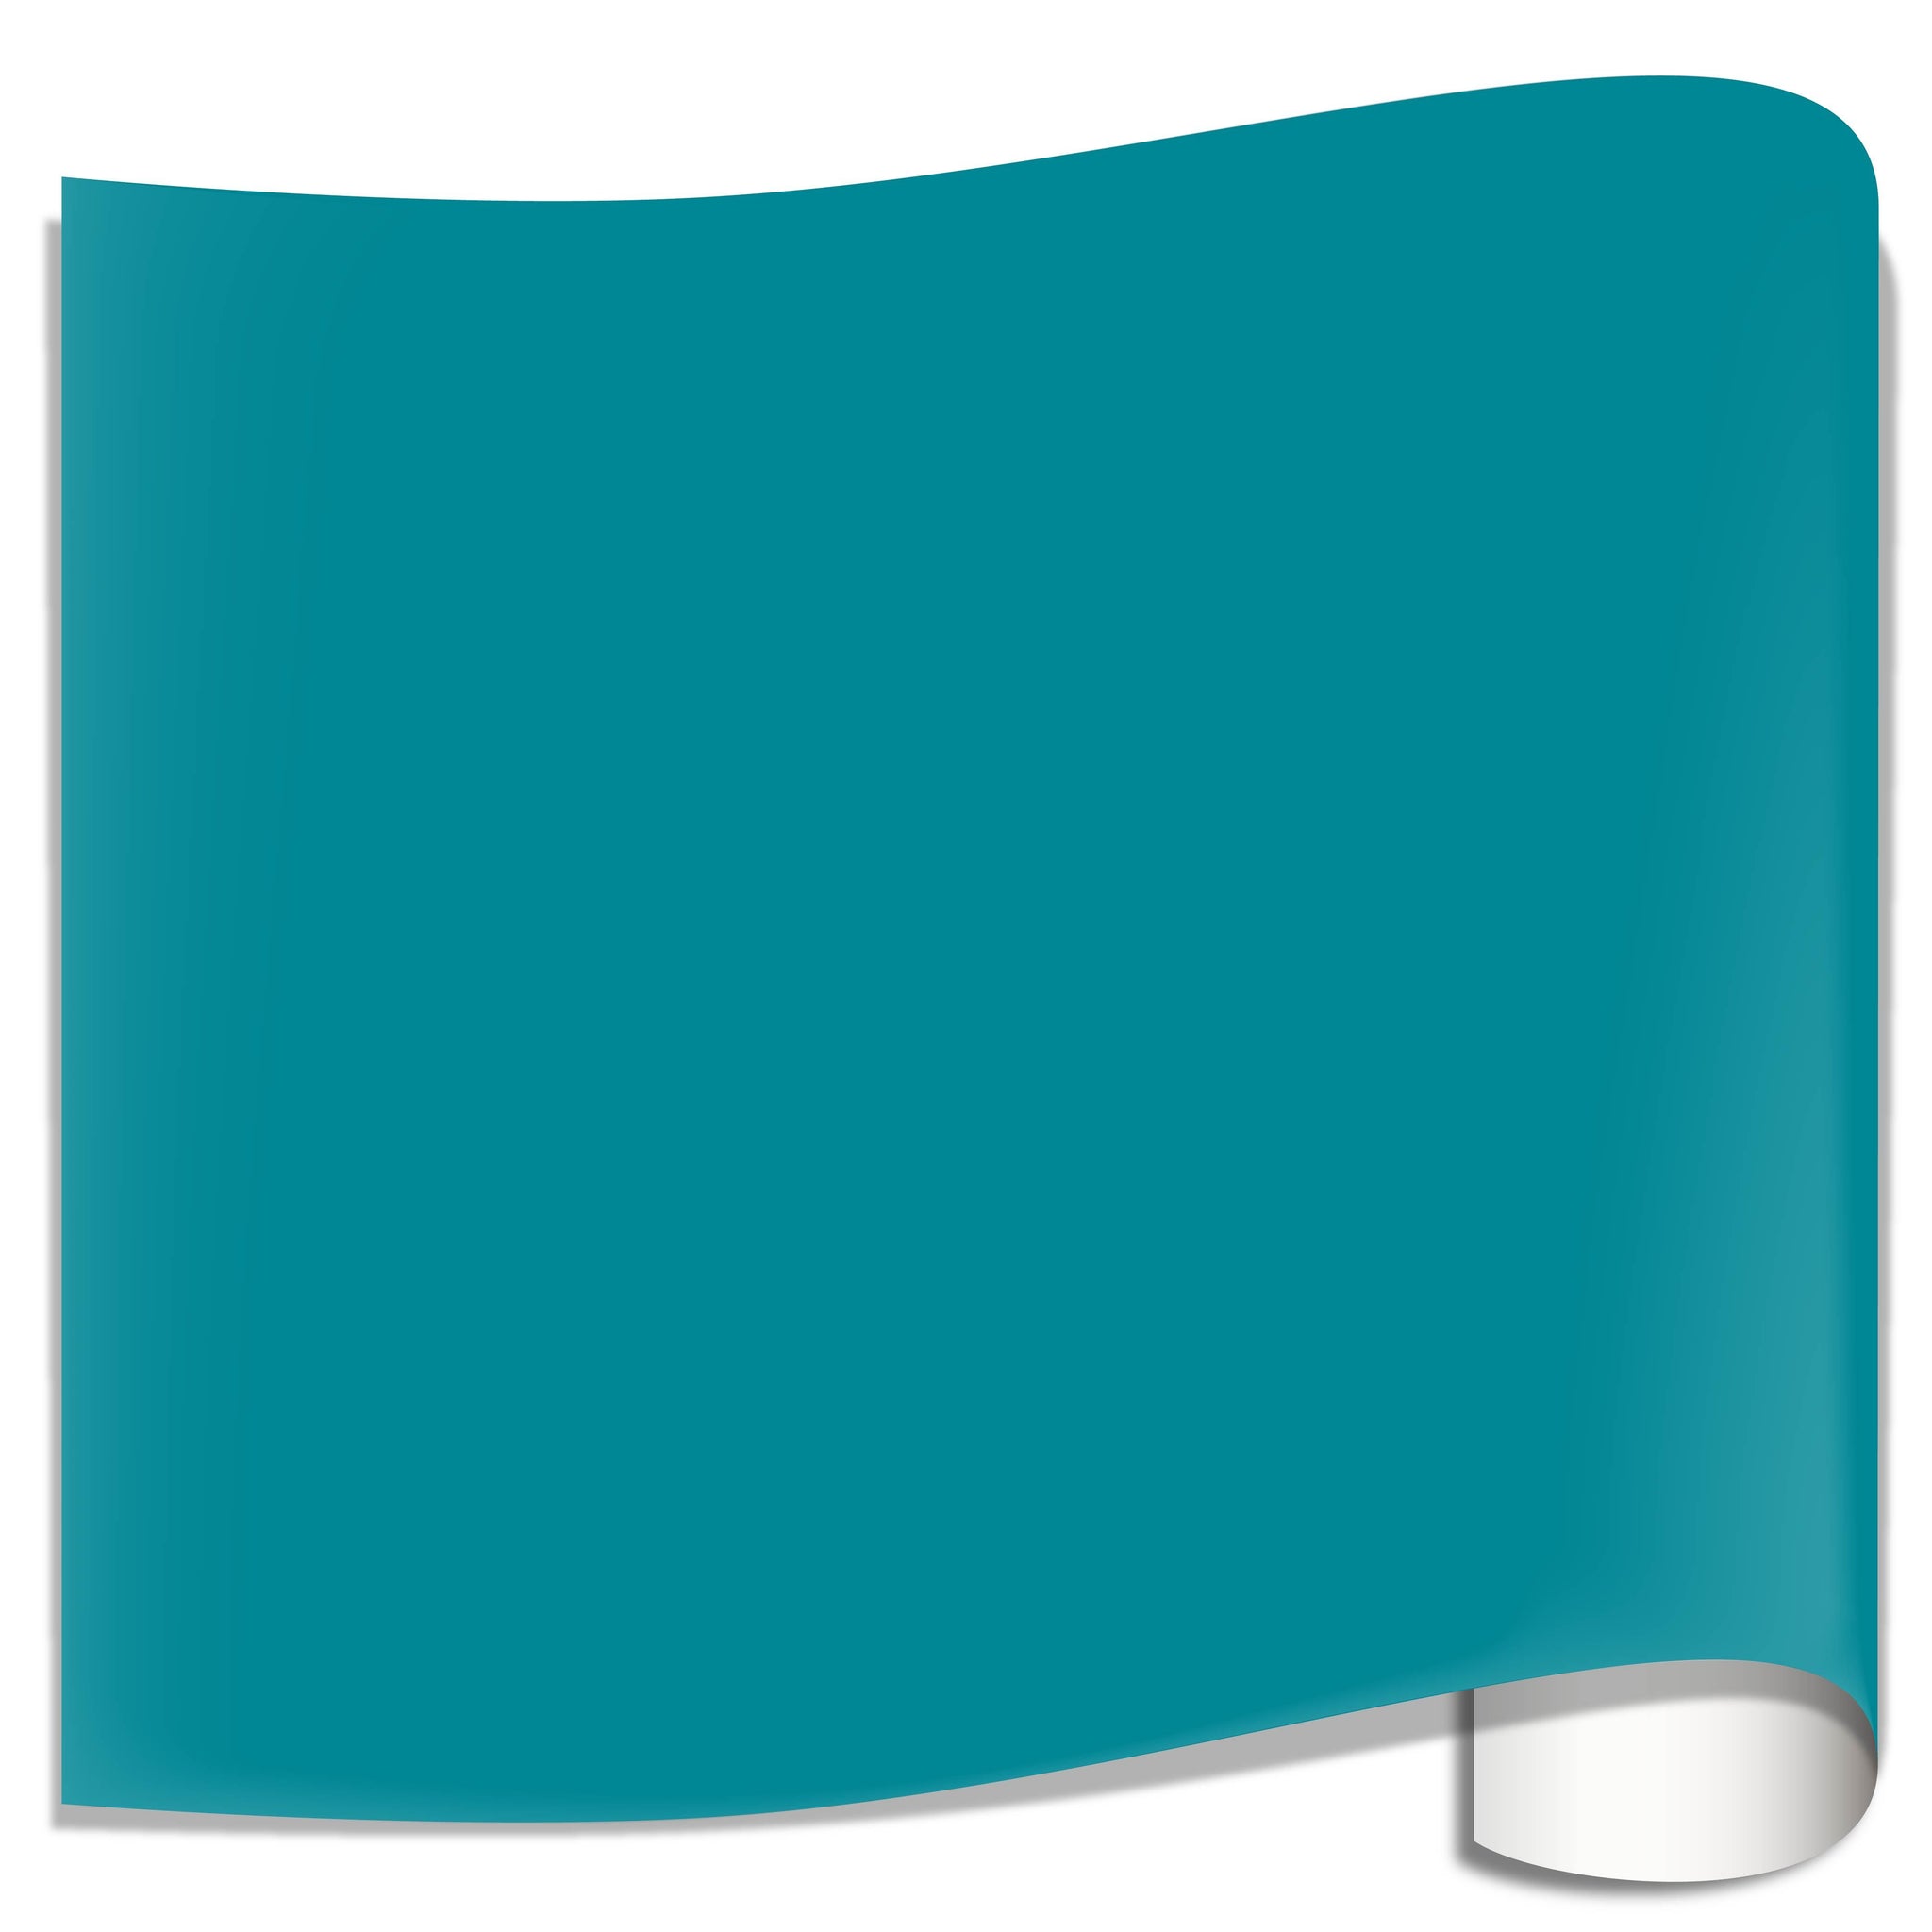 ORACAL® 651 Turquoise Blue Craft Vinyl, Craft Sheets